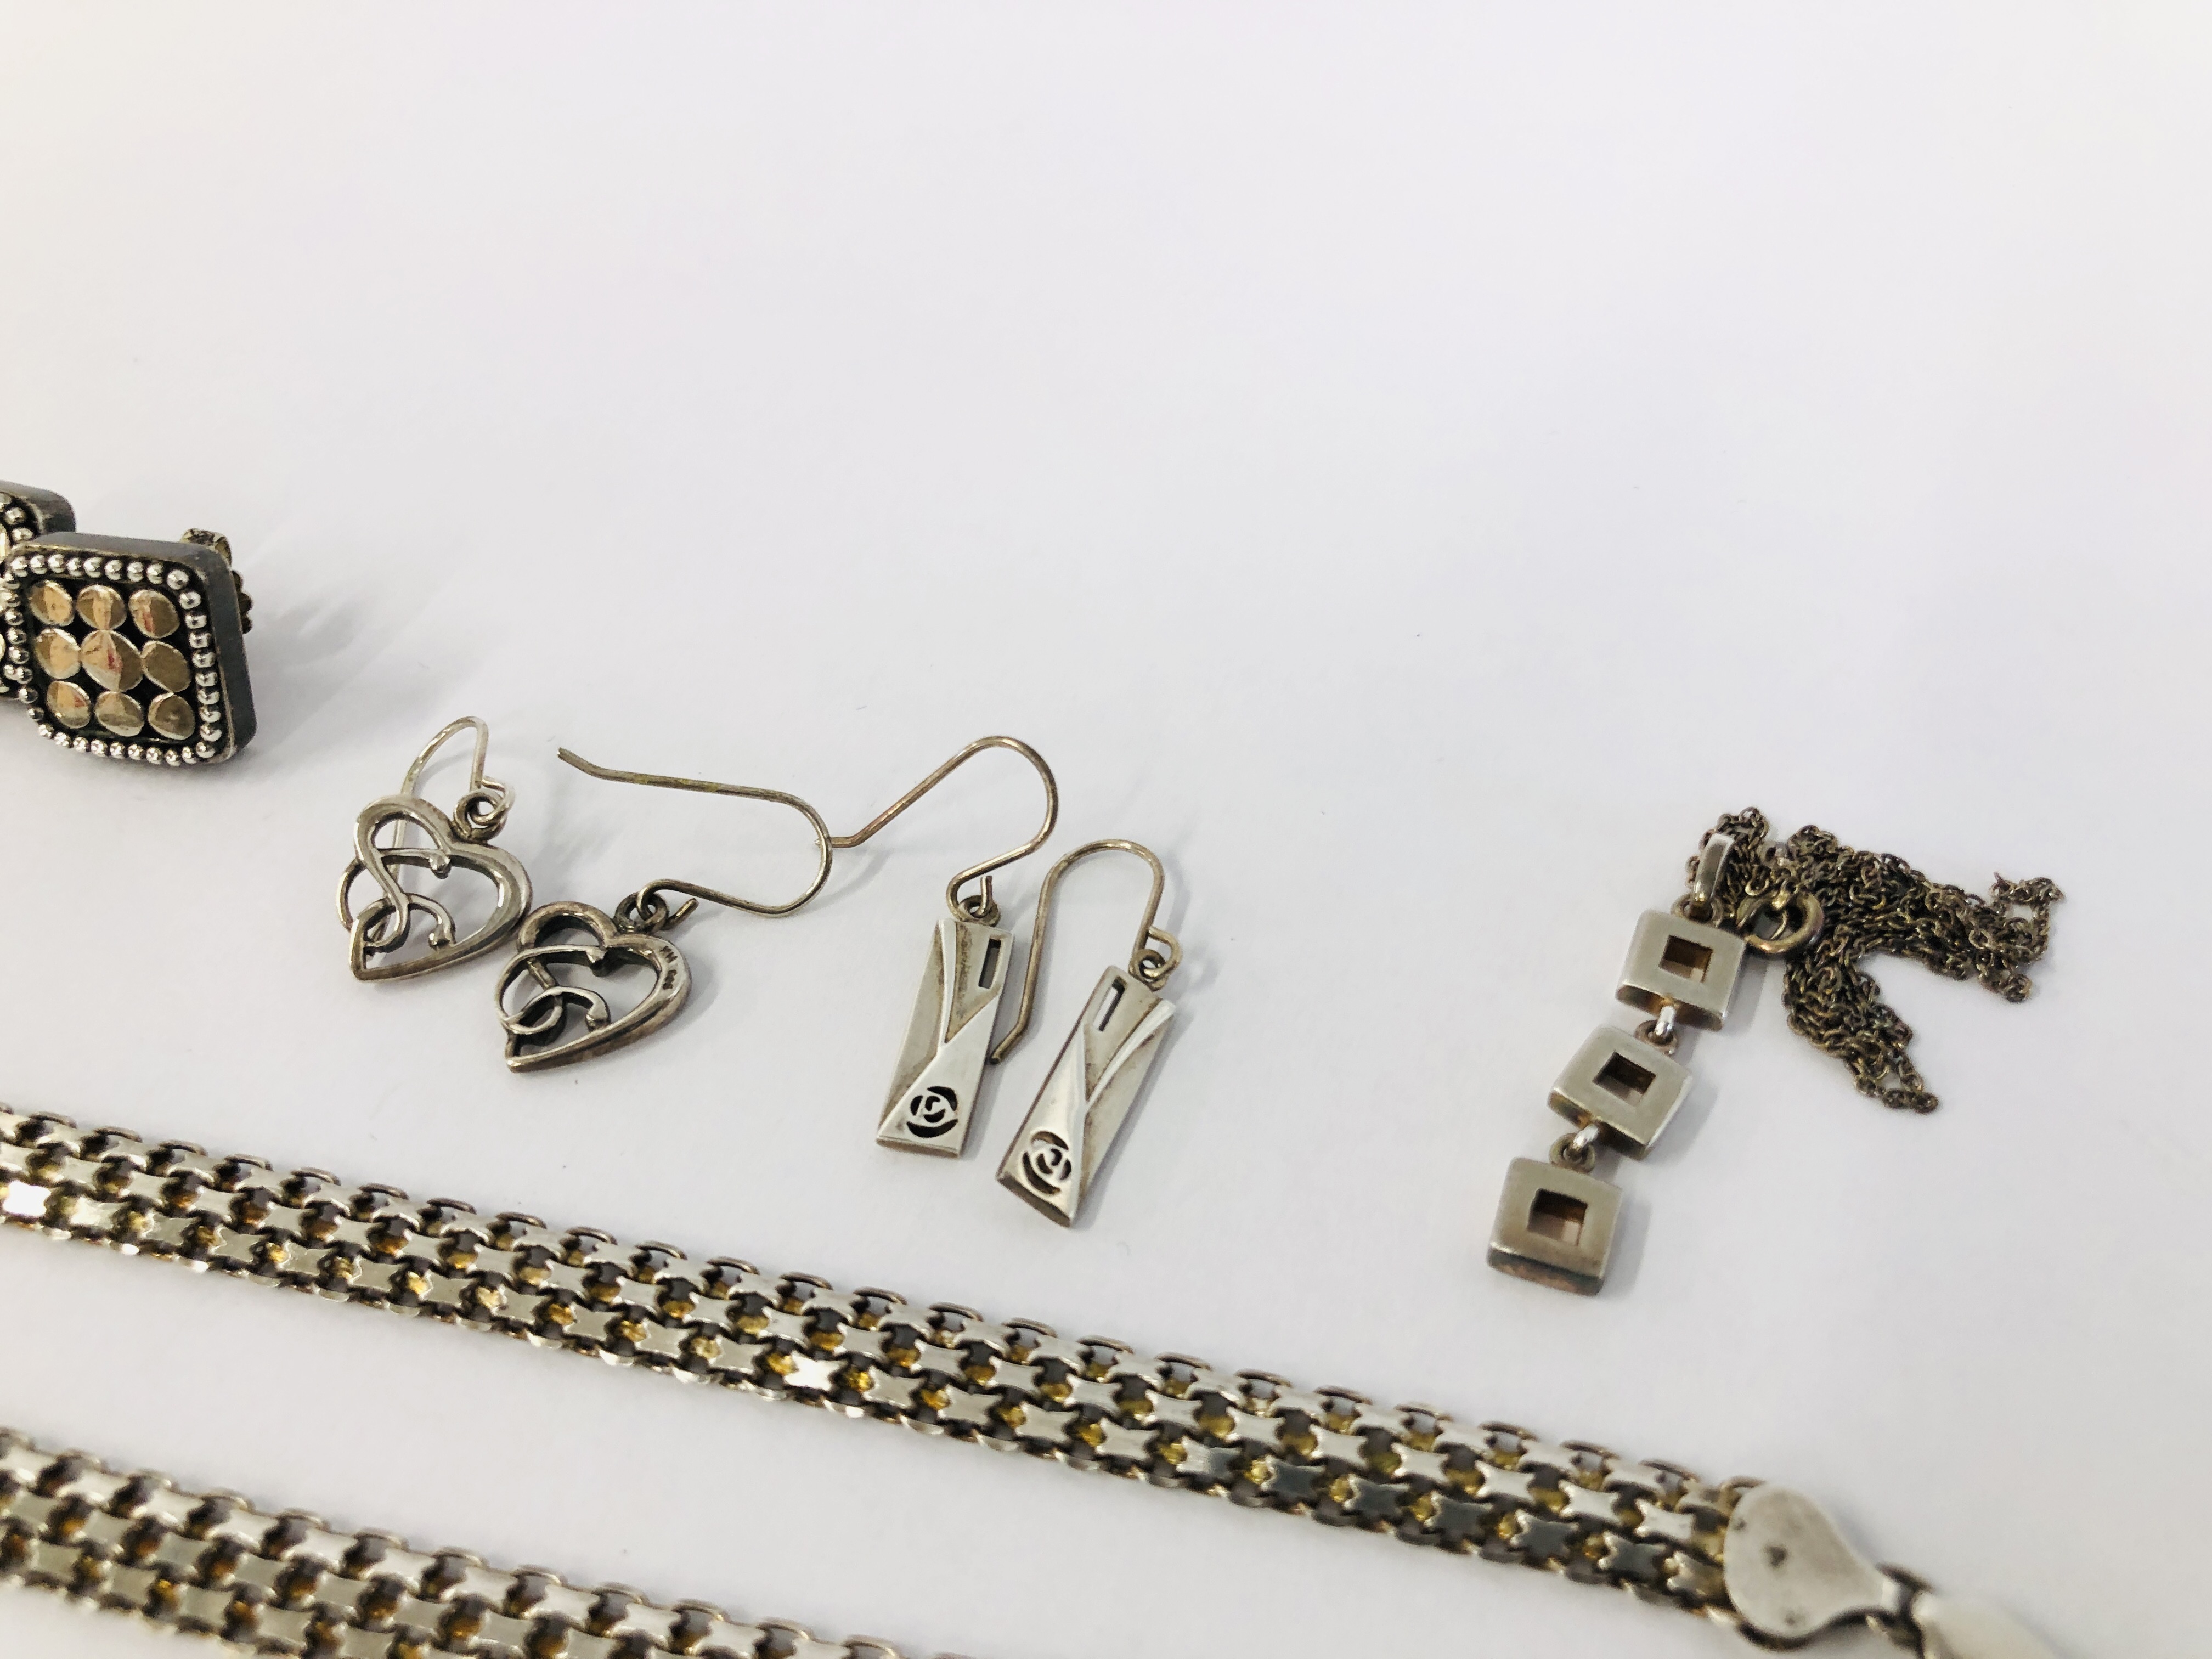 DESIGNER SILVER BRACELET AND MATCHING NECKLACE ALONG WITH KIT HEATH SILVER JEWELLERY, ETC. - Image 6 of 10